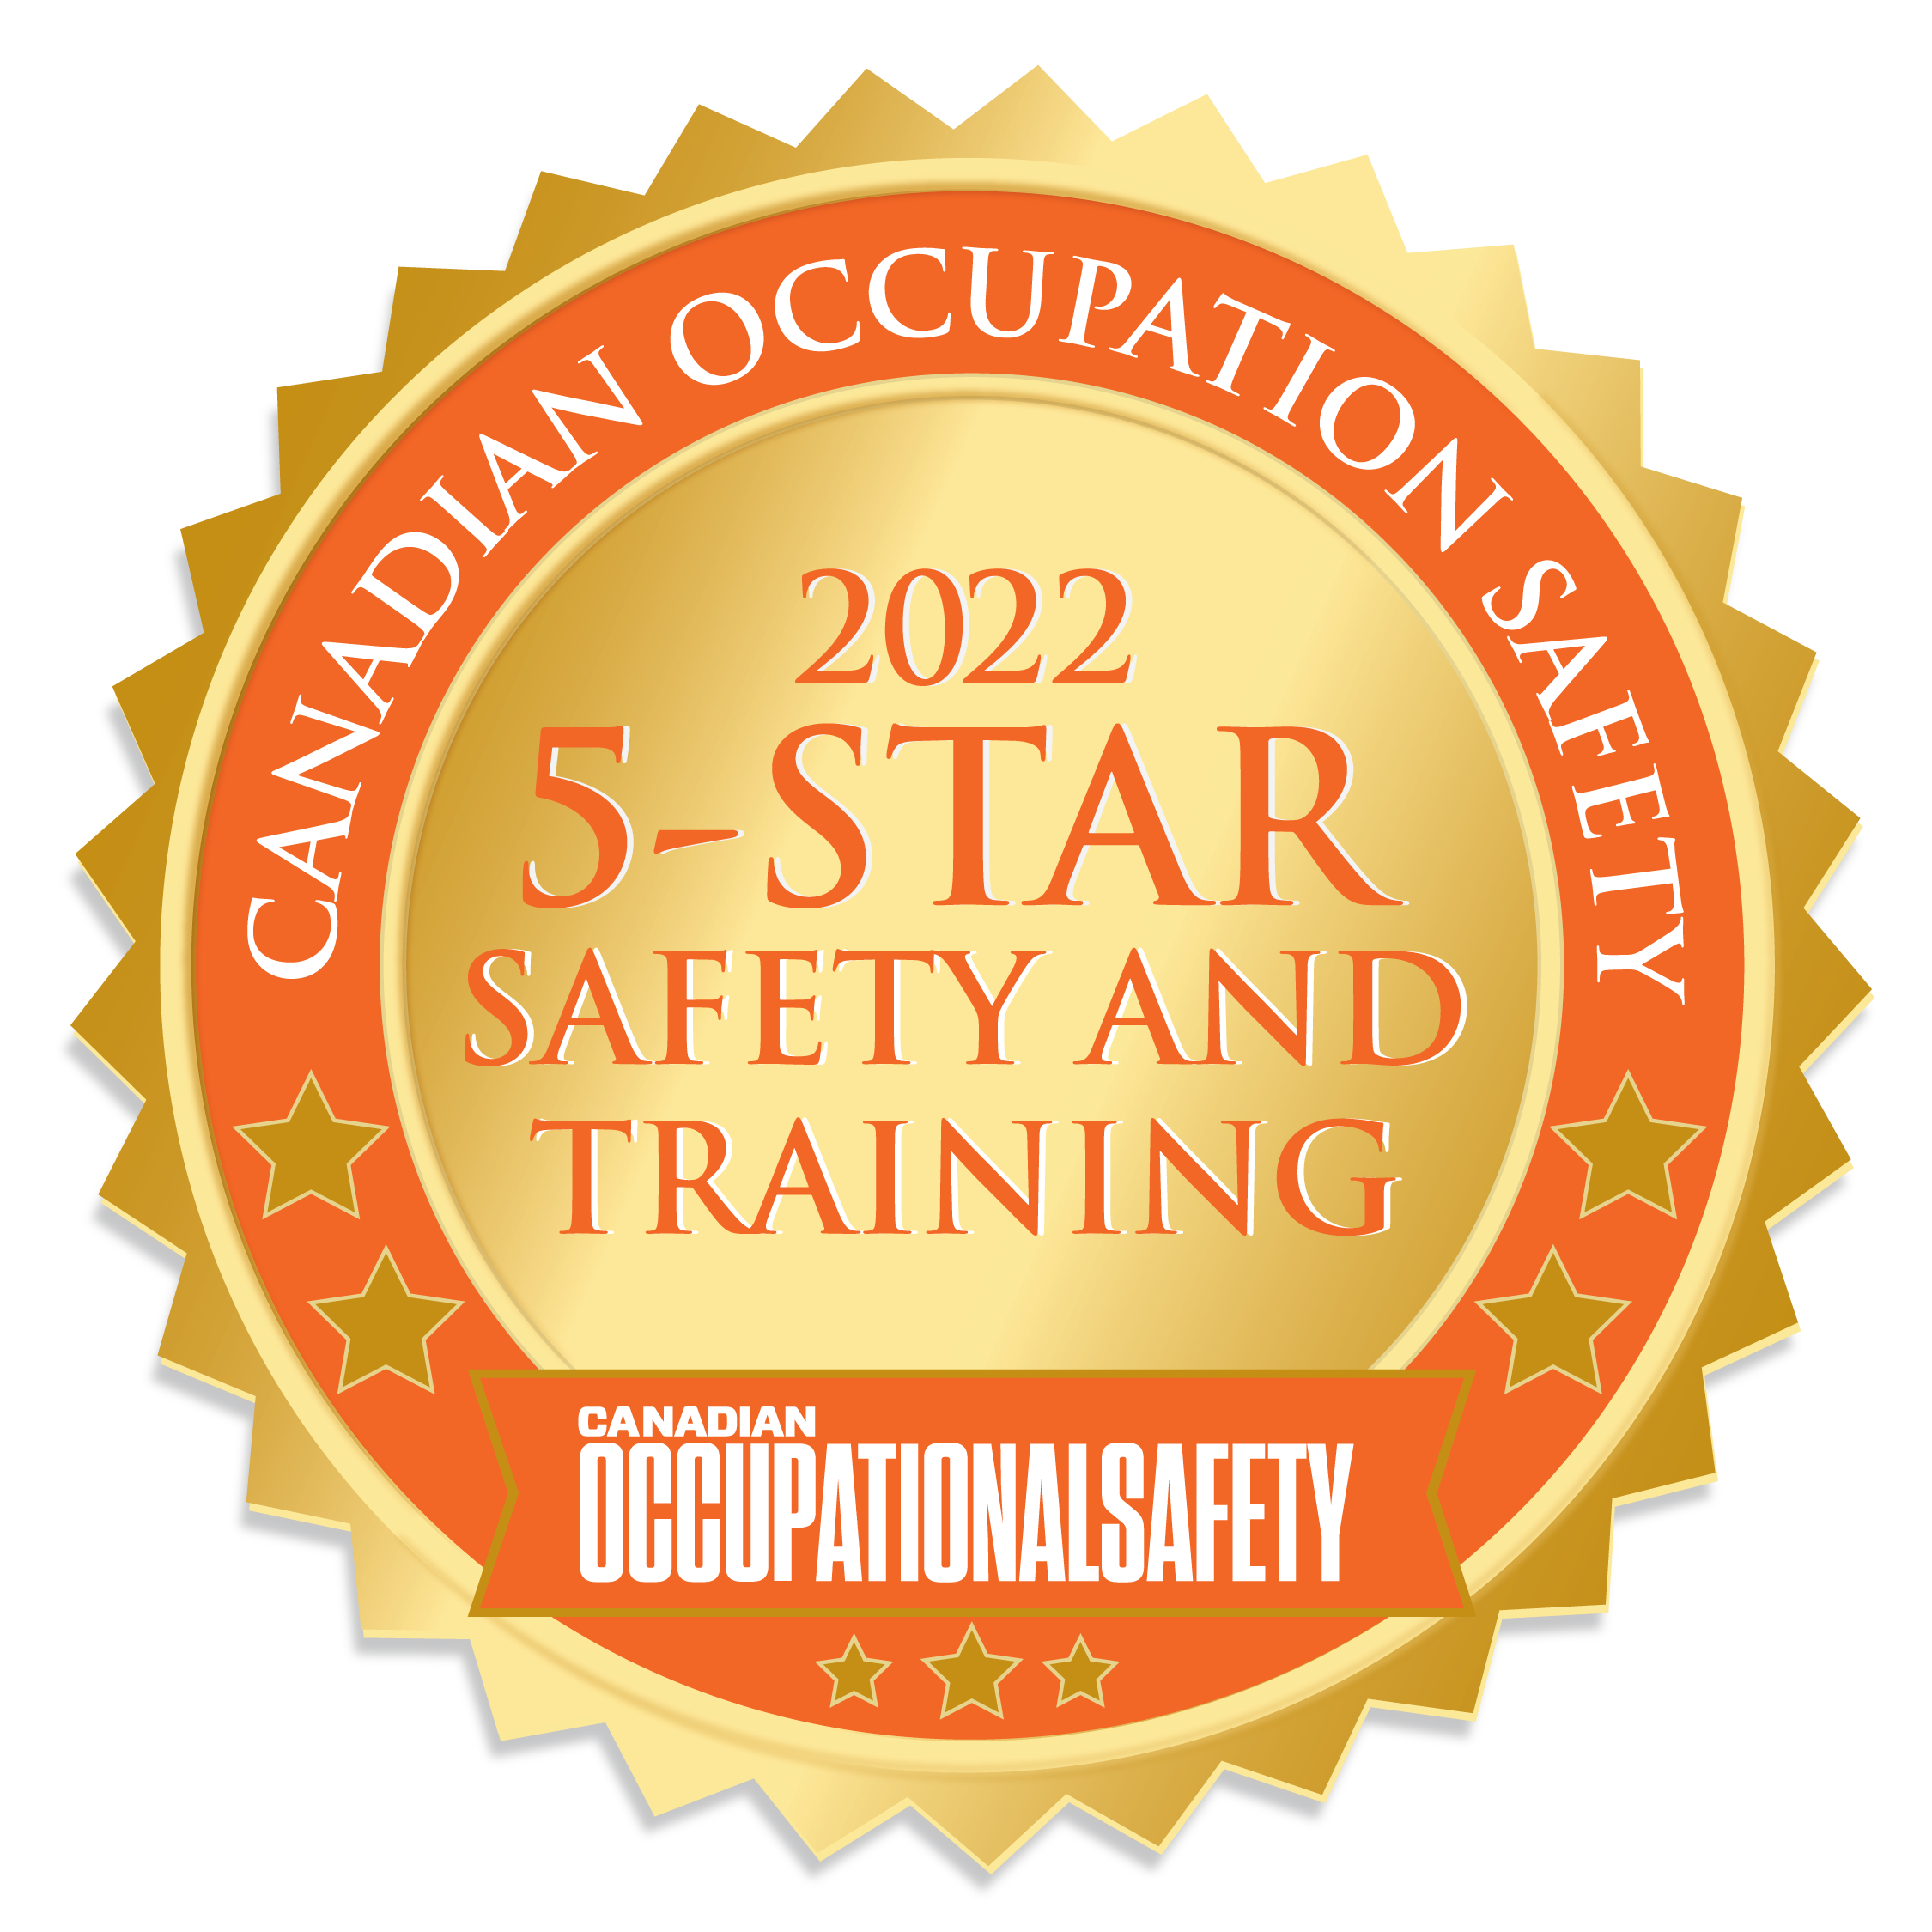 Best in safety Annual Calendar Canadian Occupational Safety